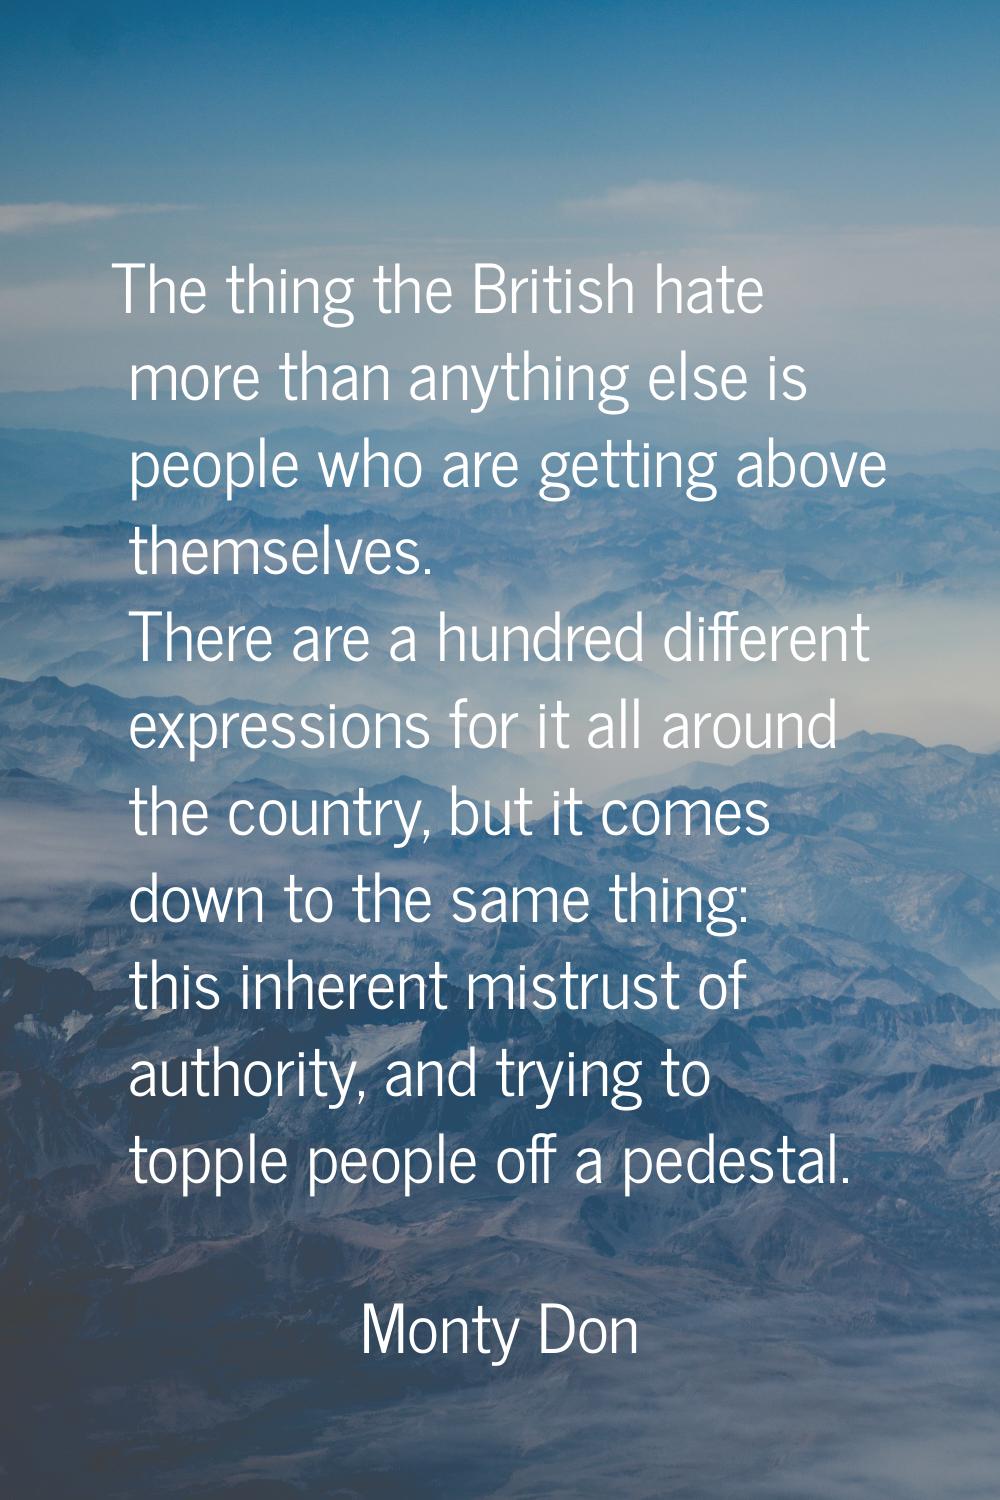 The thing the British hate more than anything else is people who are getting above themselves. Ther